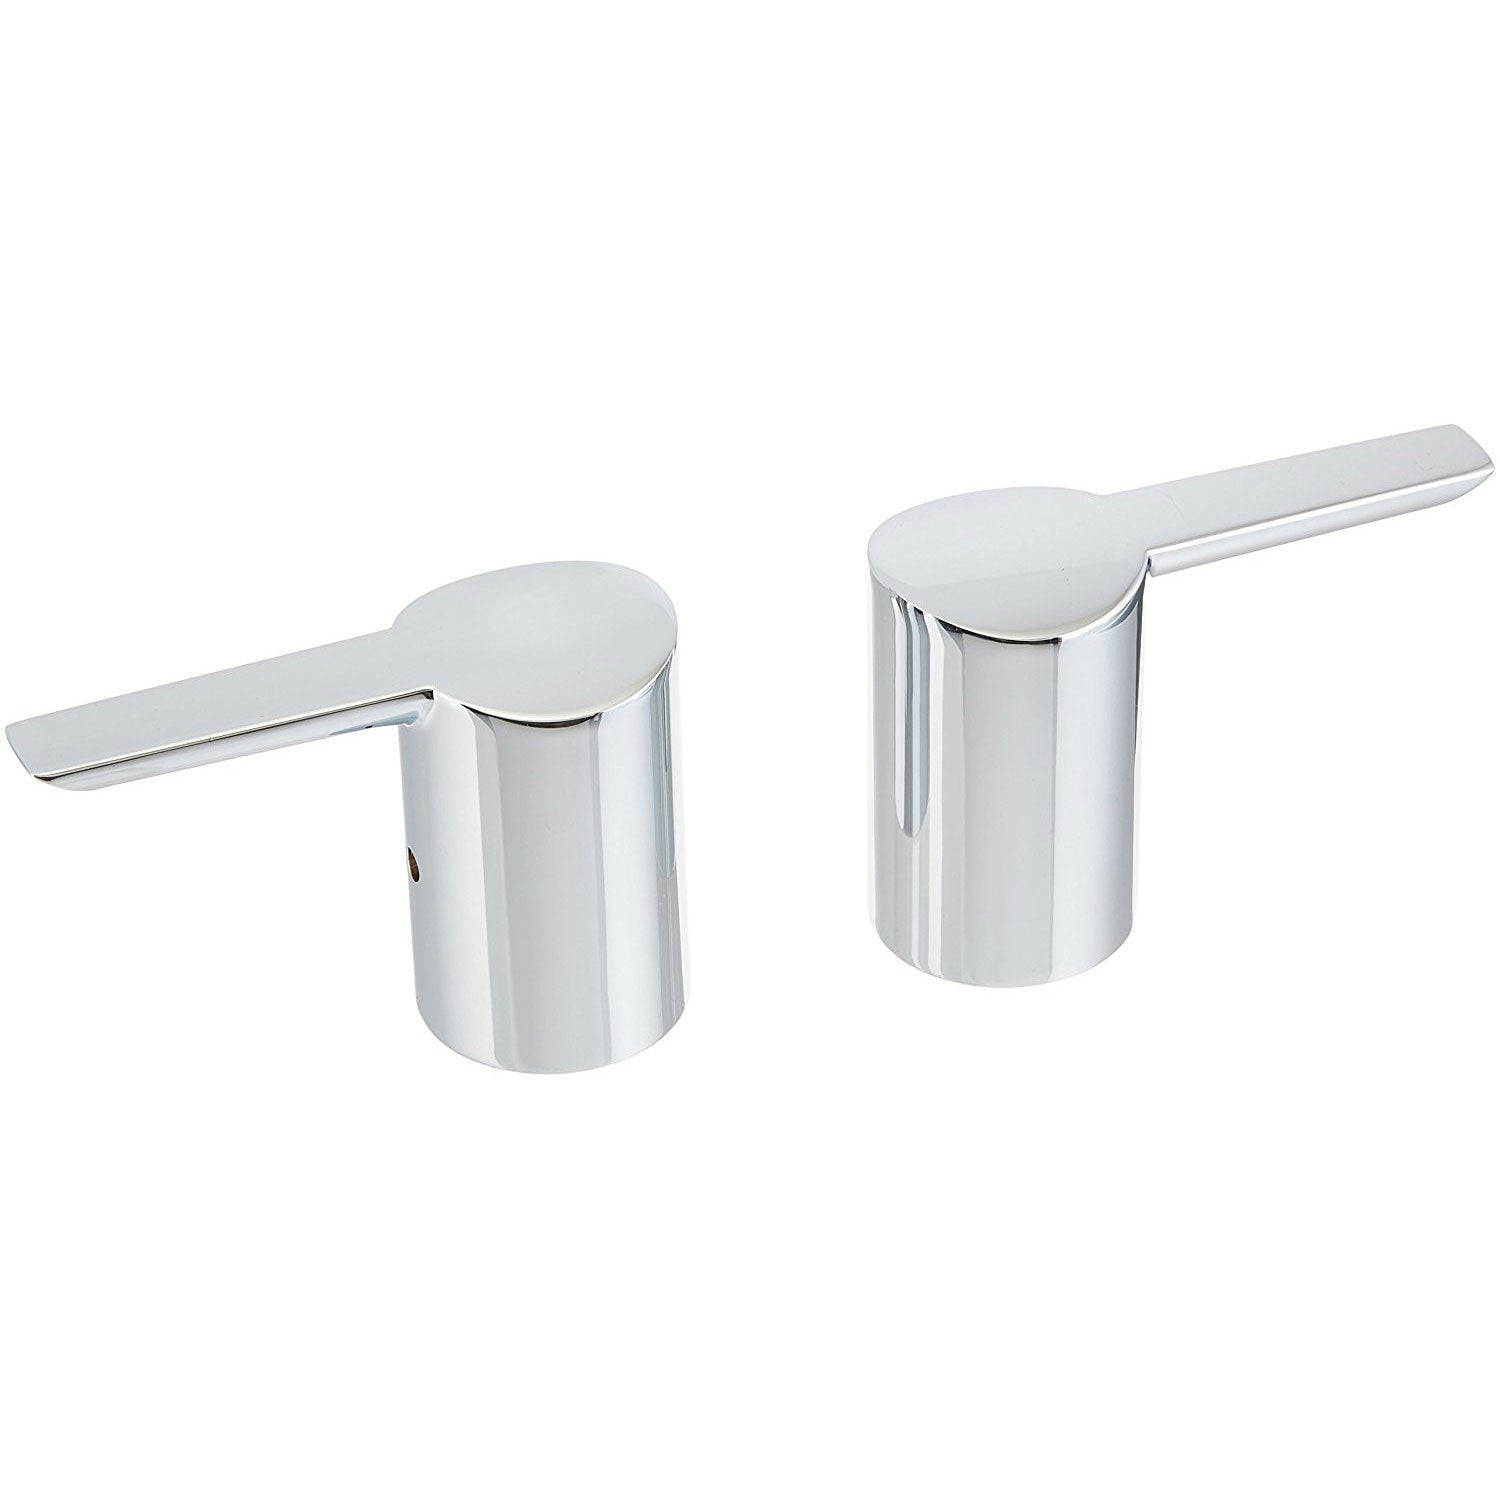 Delta Compel Collection Chrome Finish Roman Tub Metal Lever Handles - Quantity 2 Included DH661